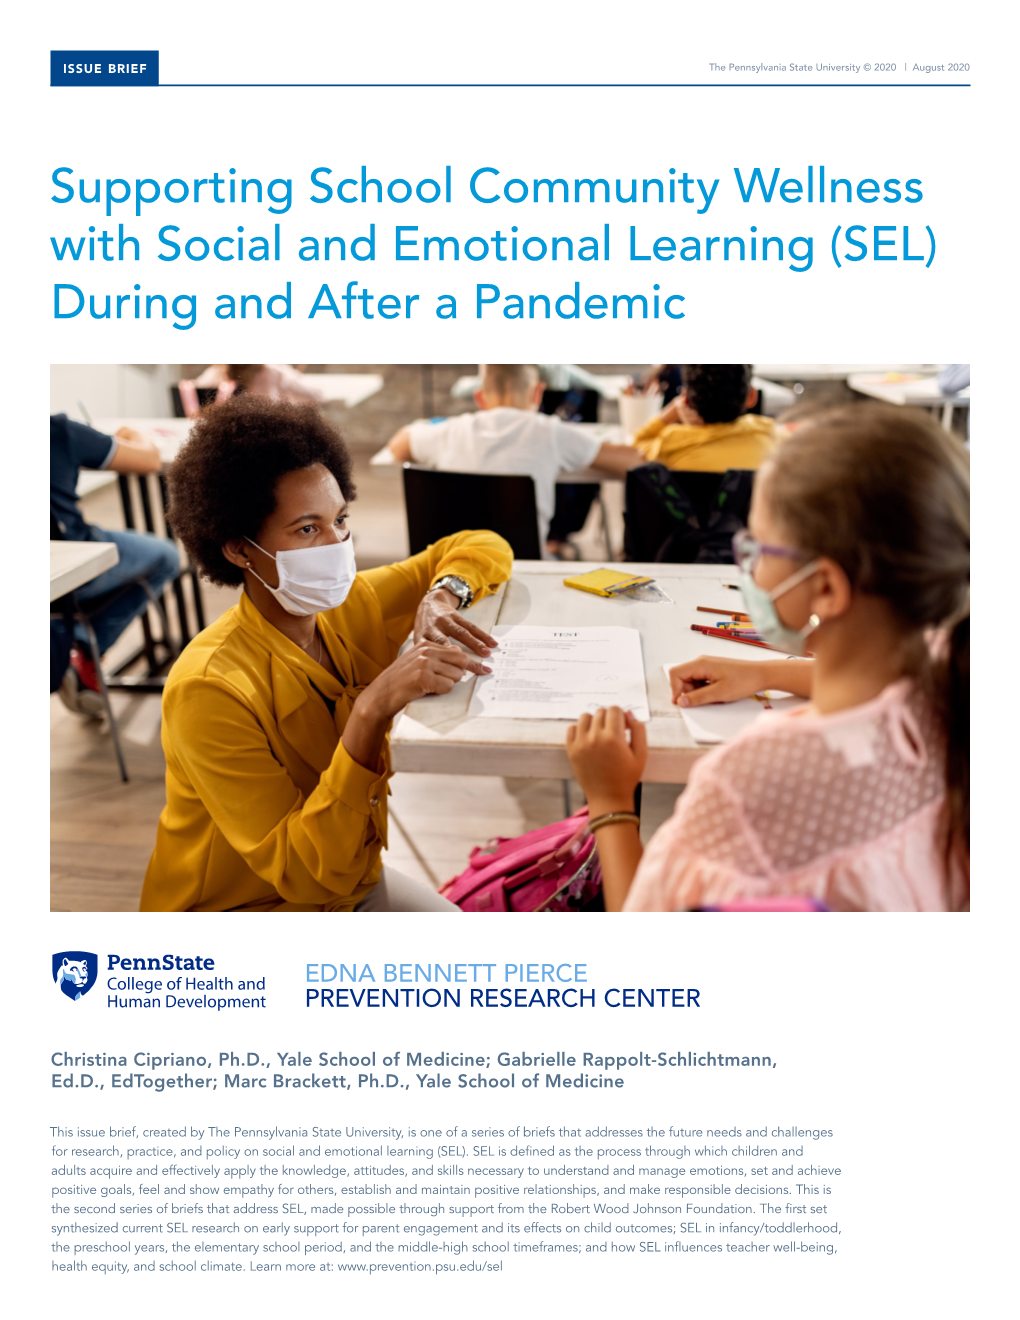 Supporting School Community Wellness with Social and Emotional Learning (SEL) During and After a Pandemic